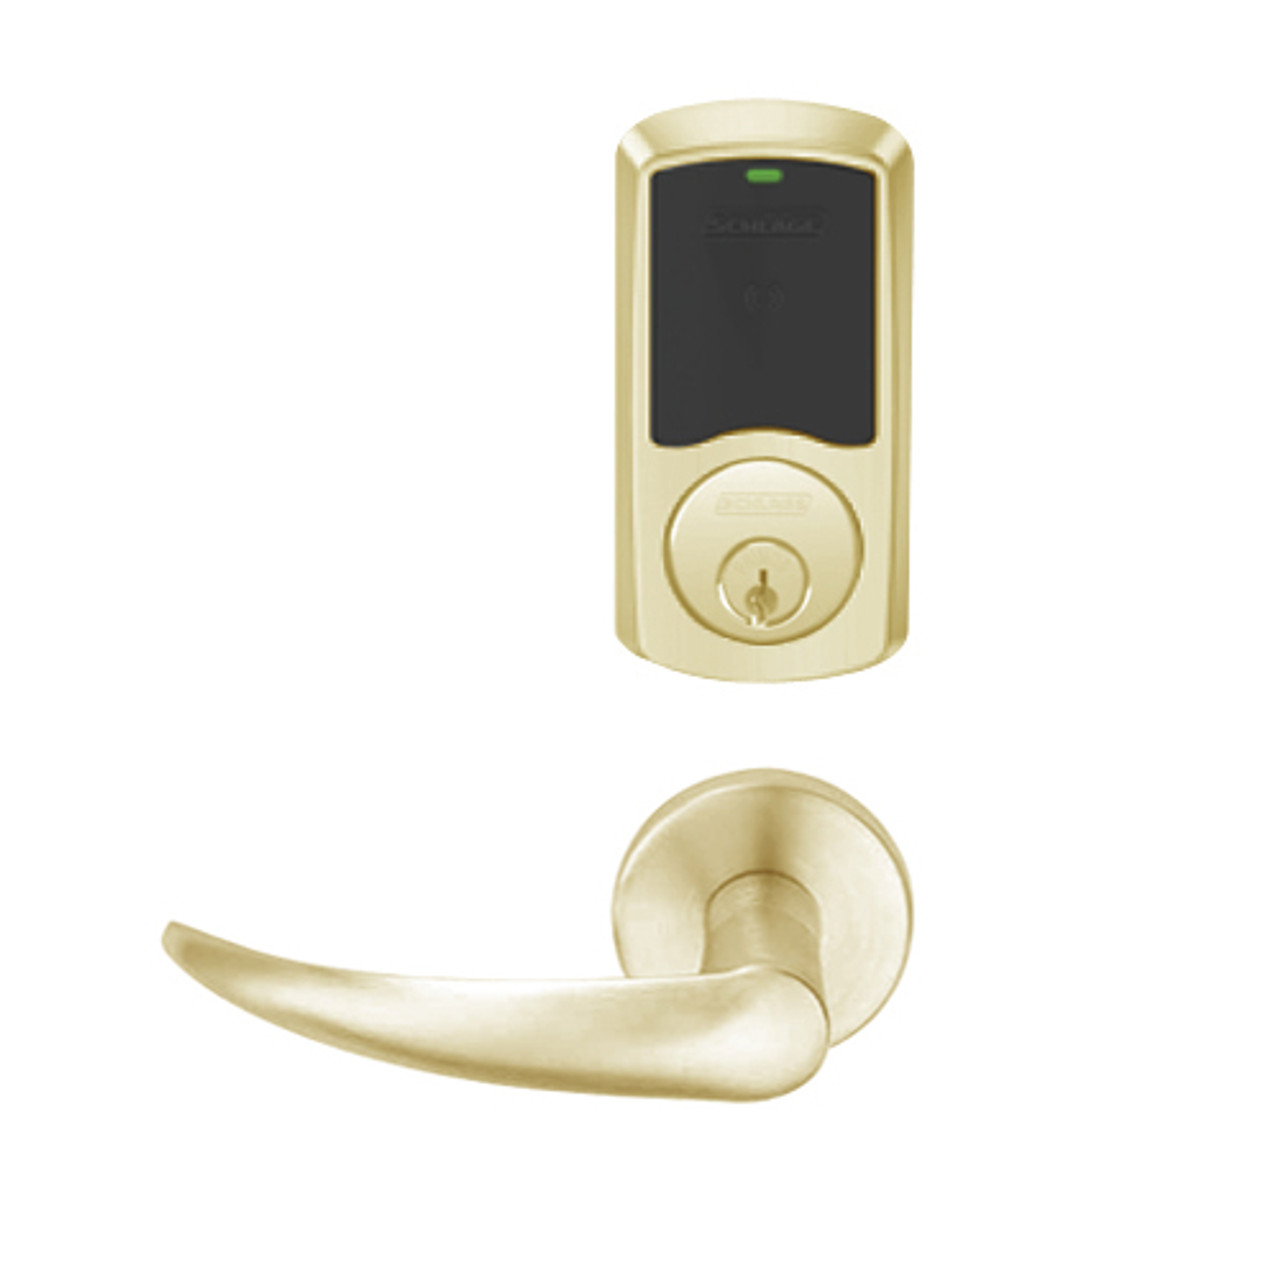 LEMB-GRW-P-OME-606-00B Schlage Privacy/Office Wireless Greenwich Mortise Lock with LED Indicator and Omega Lever in Satin Brass